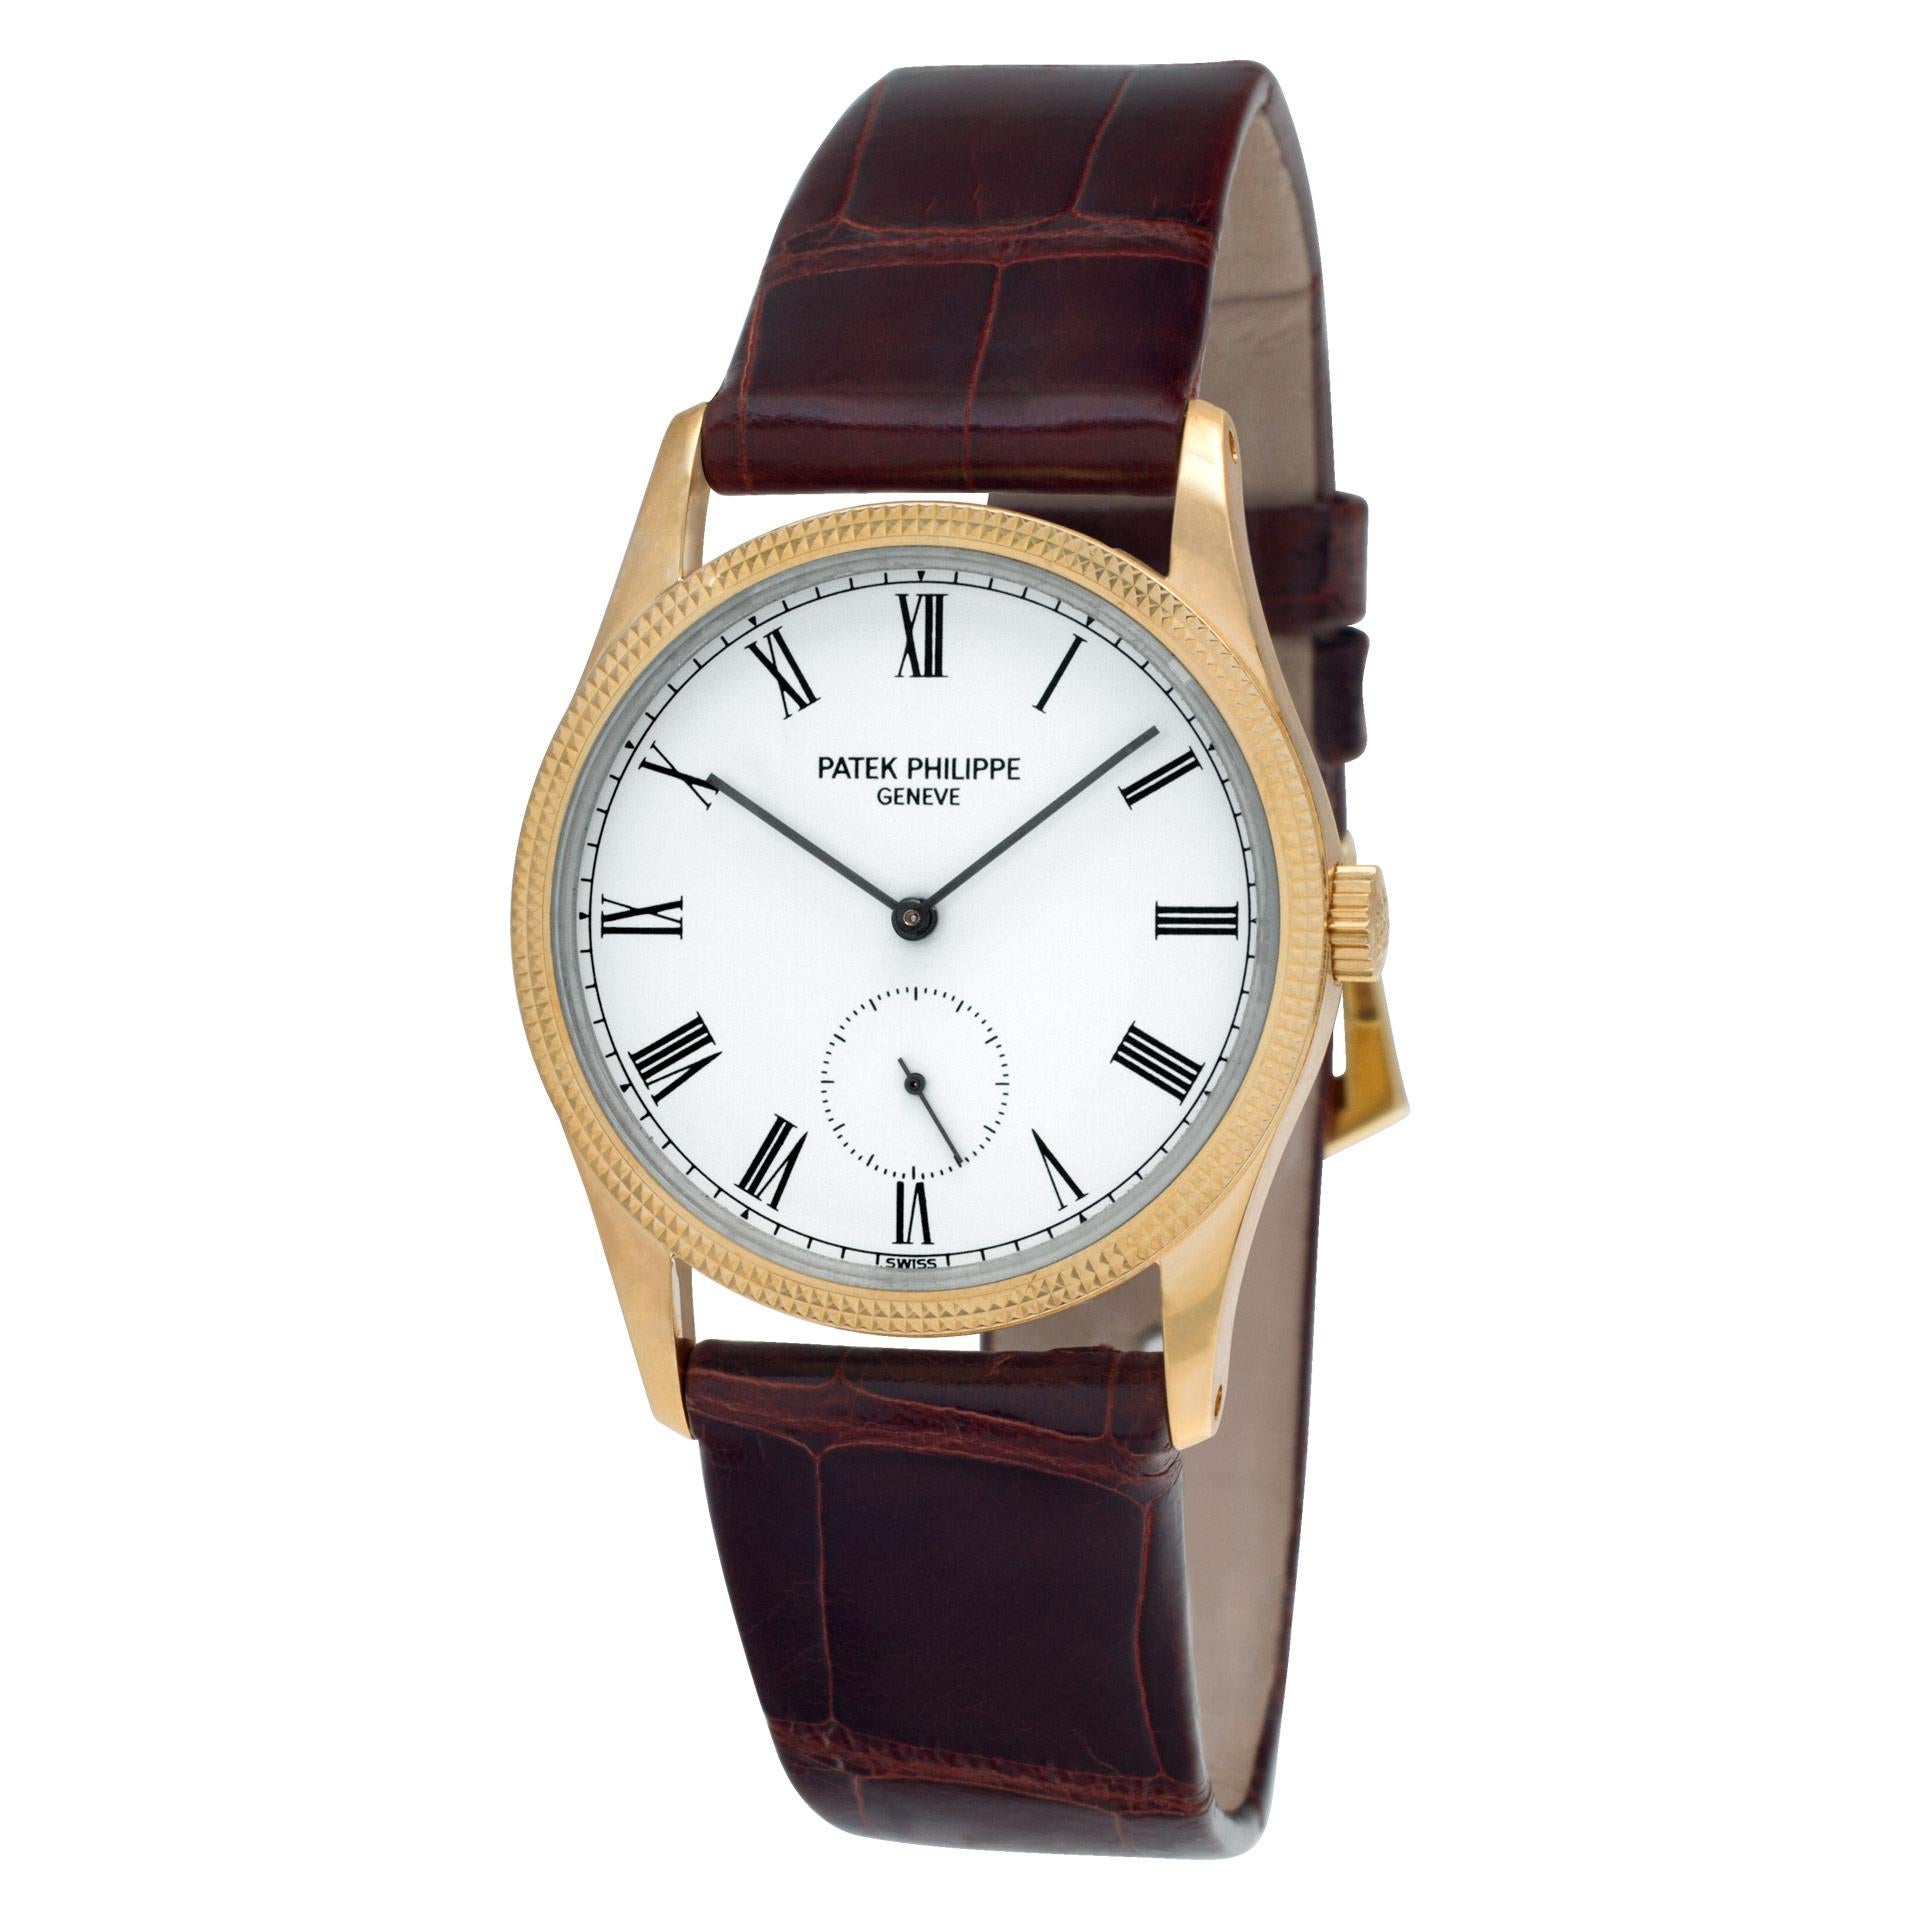 Patek Philippe Calatrava in 18k yellow gold with hobnail bezel on leather strap with PP tang buckle. Manual w/ subseconds. With Archive papers. 30 mm case size. Ref 3796D. Circa 1993. Fine Pre-owned Patek Philippe Watch. Certified preowned Dress